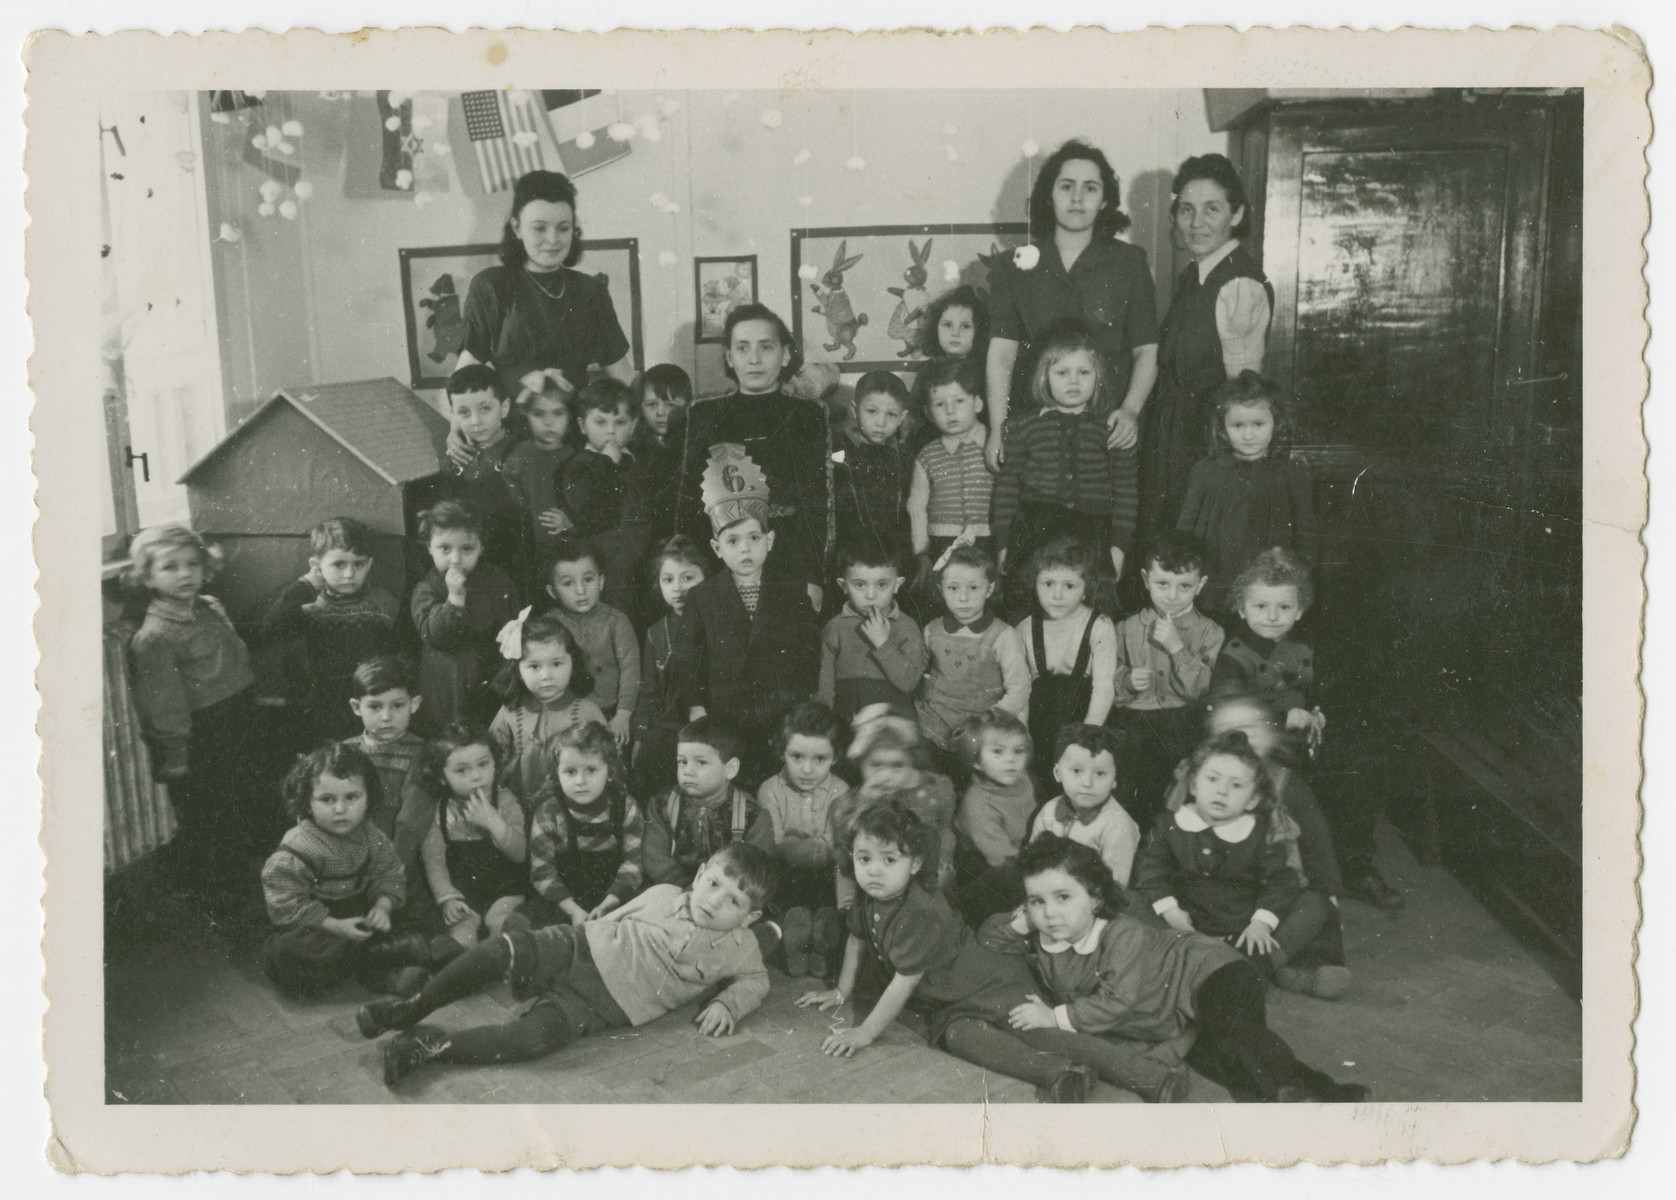 Group portrait of young children in a school in the Schlachtensee displaced persons camp. 

Joseph Fridling, wearing a special hat marking his sixth birthday, stands in the center.